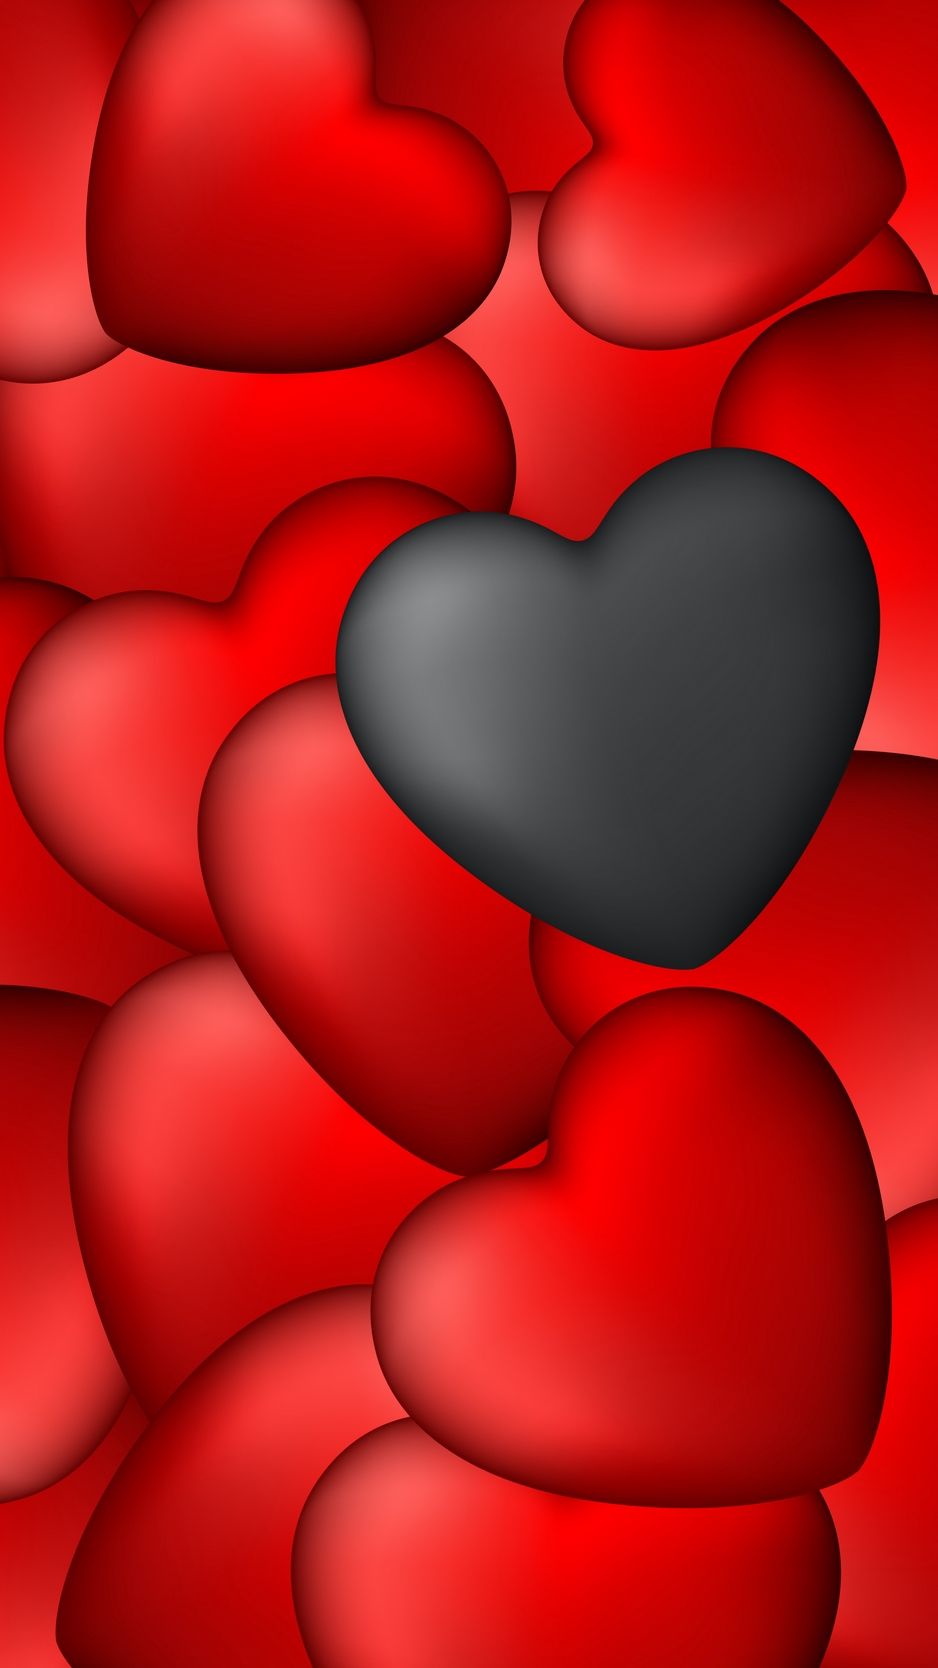 Wallpaper Hearts, Art, Red, Black - Red And Black Heart Hd - 938x1668  Wallpaper 